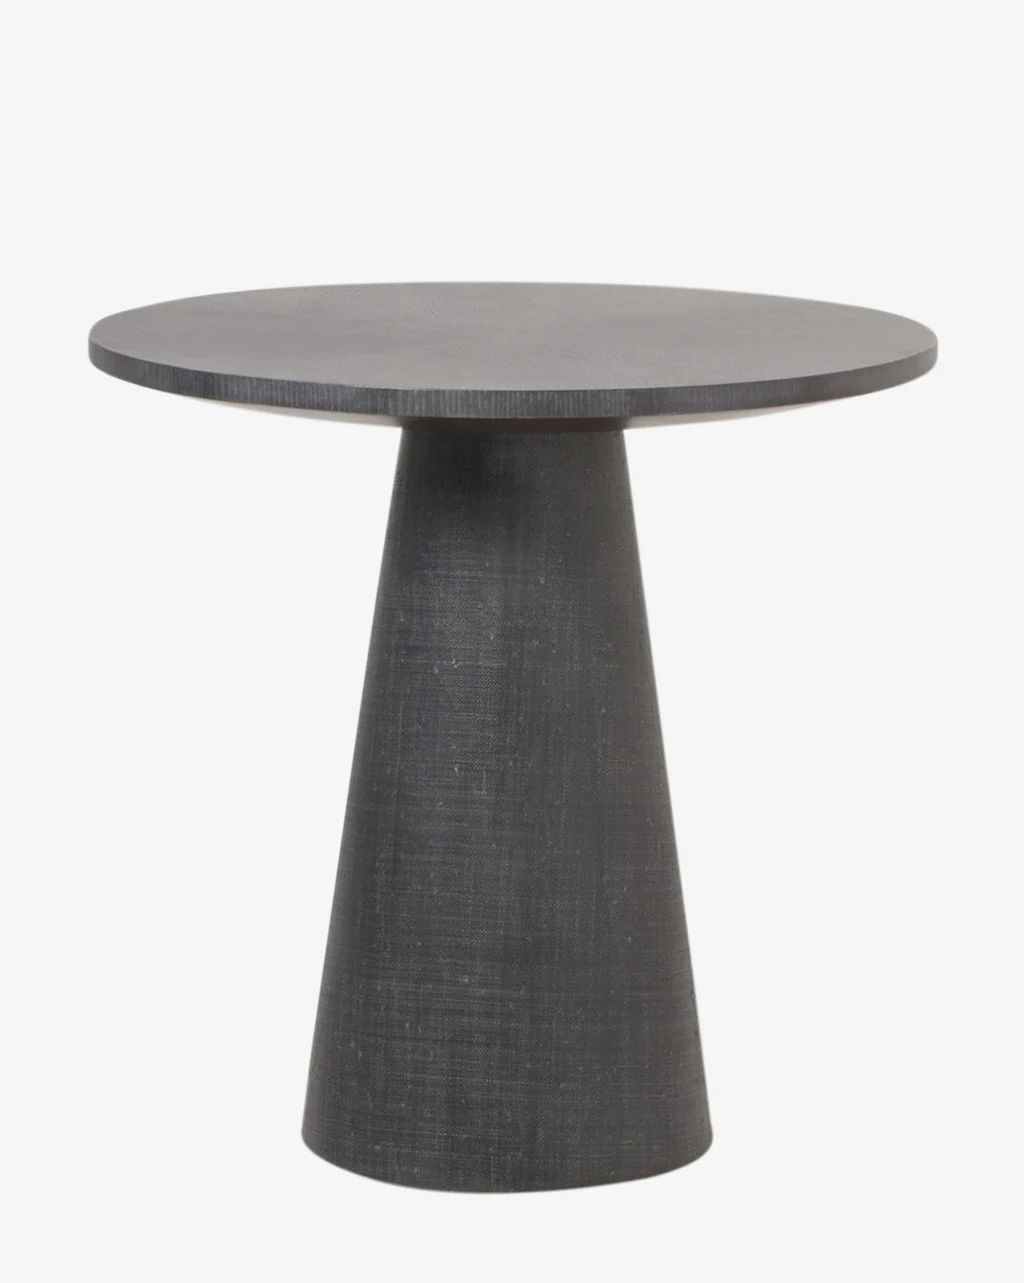 Sanderson Side Table | McGee & Co.